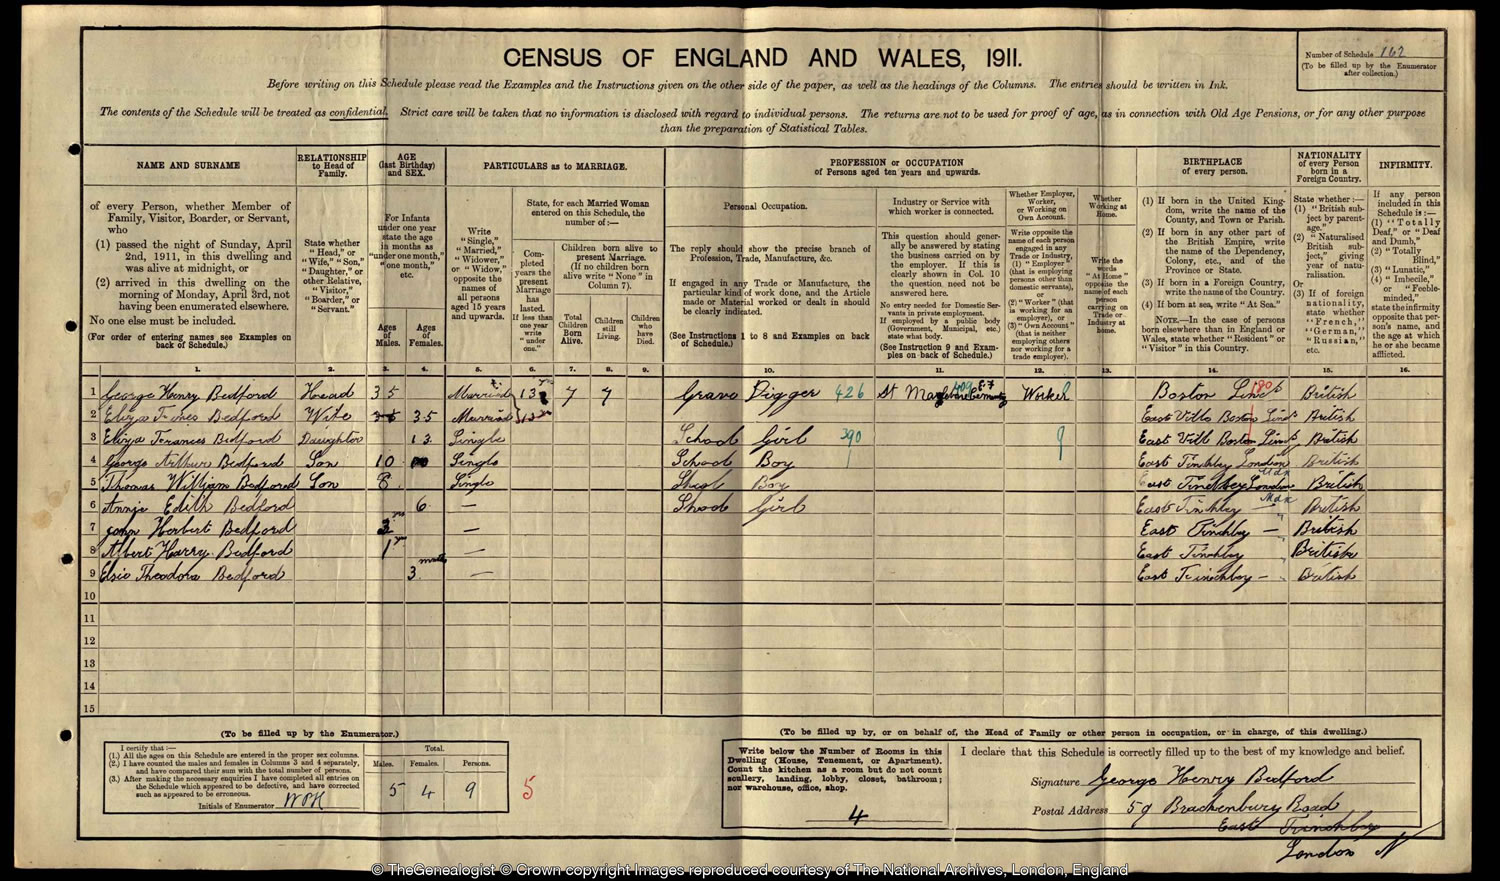 1911 census of Finchley records George Henry Bedford and Elizabeth Frances Clements household